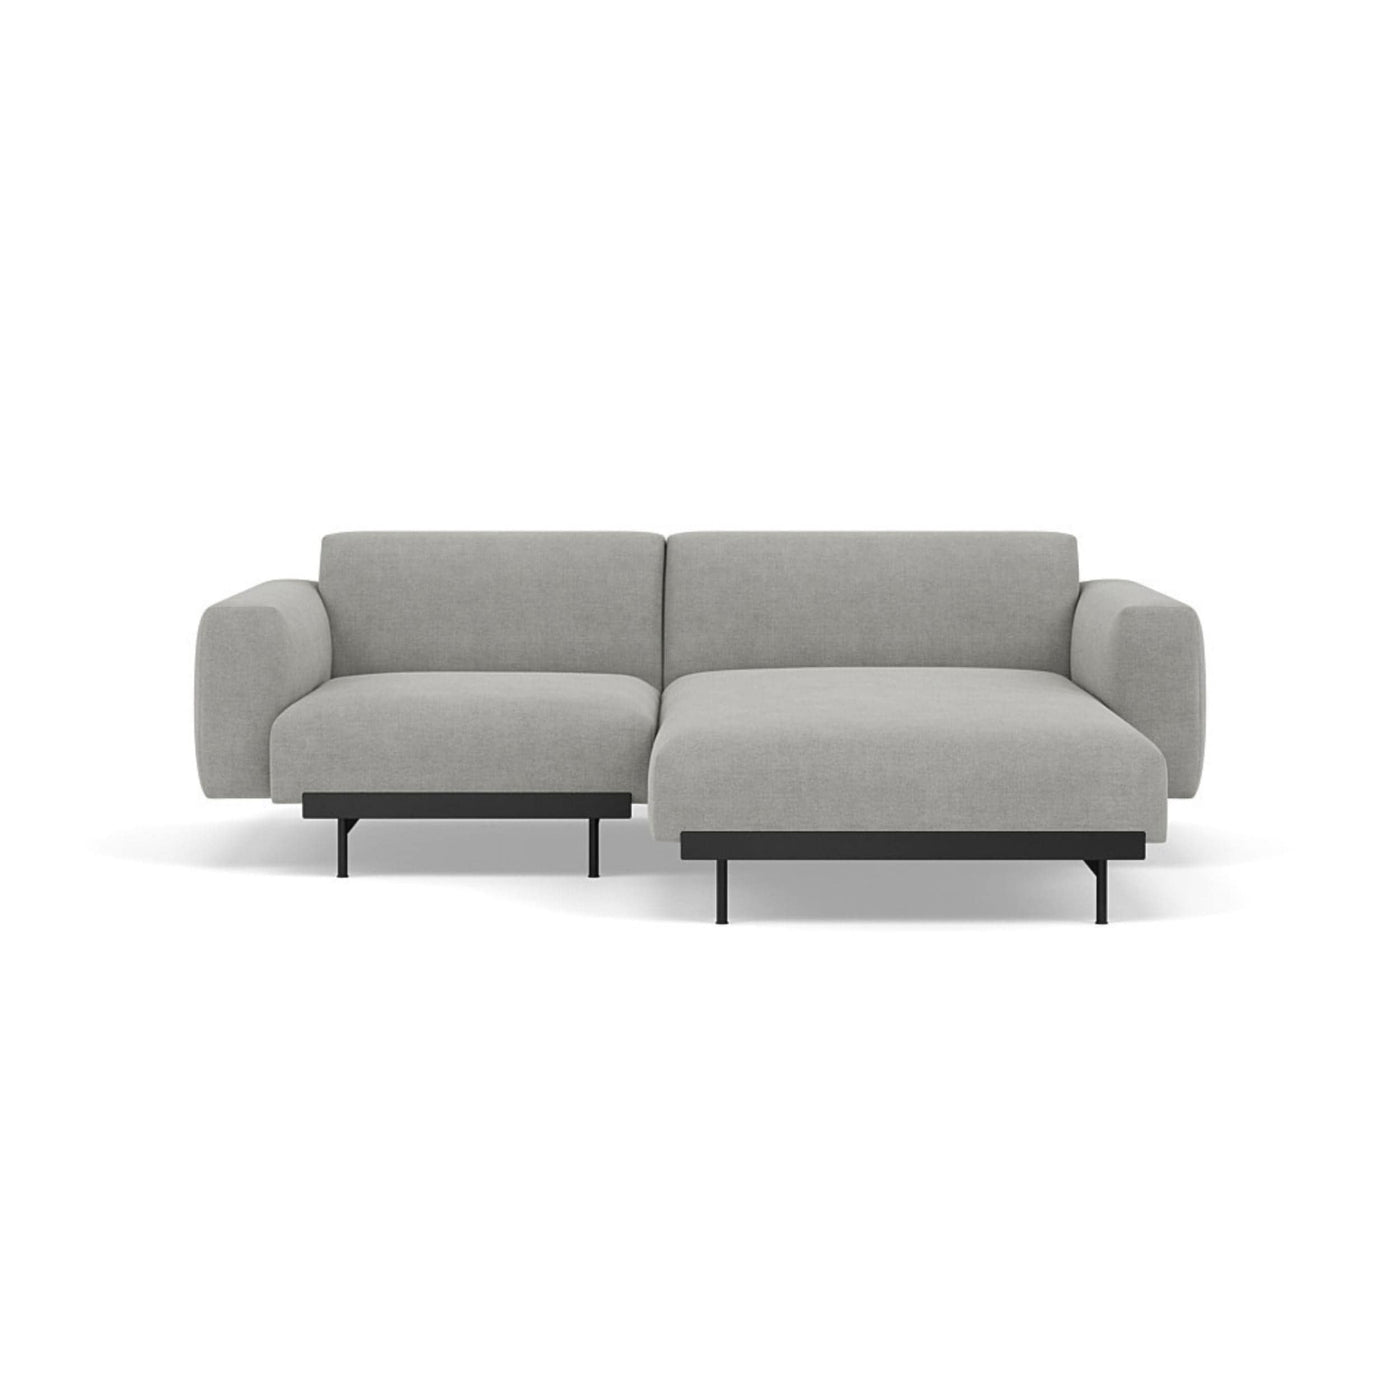 Muuto In Situ Modular 2 Seater Sofa, configuration 4. Made order from sometoday designs #colour_fiord-151